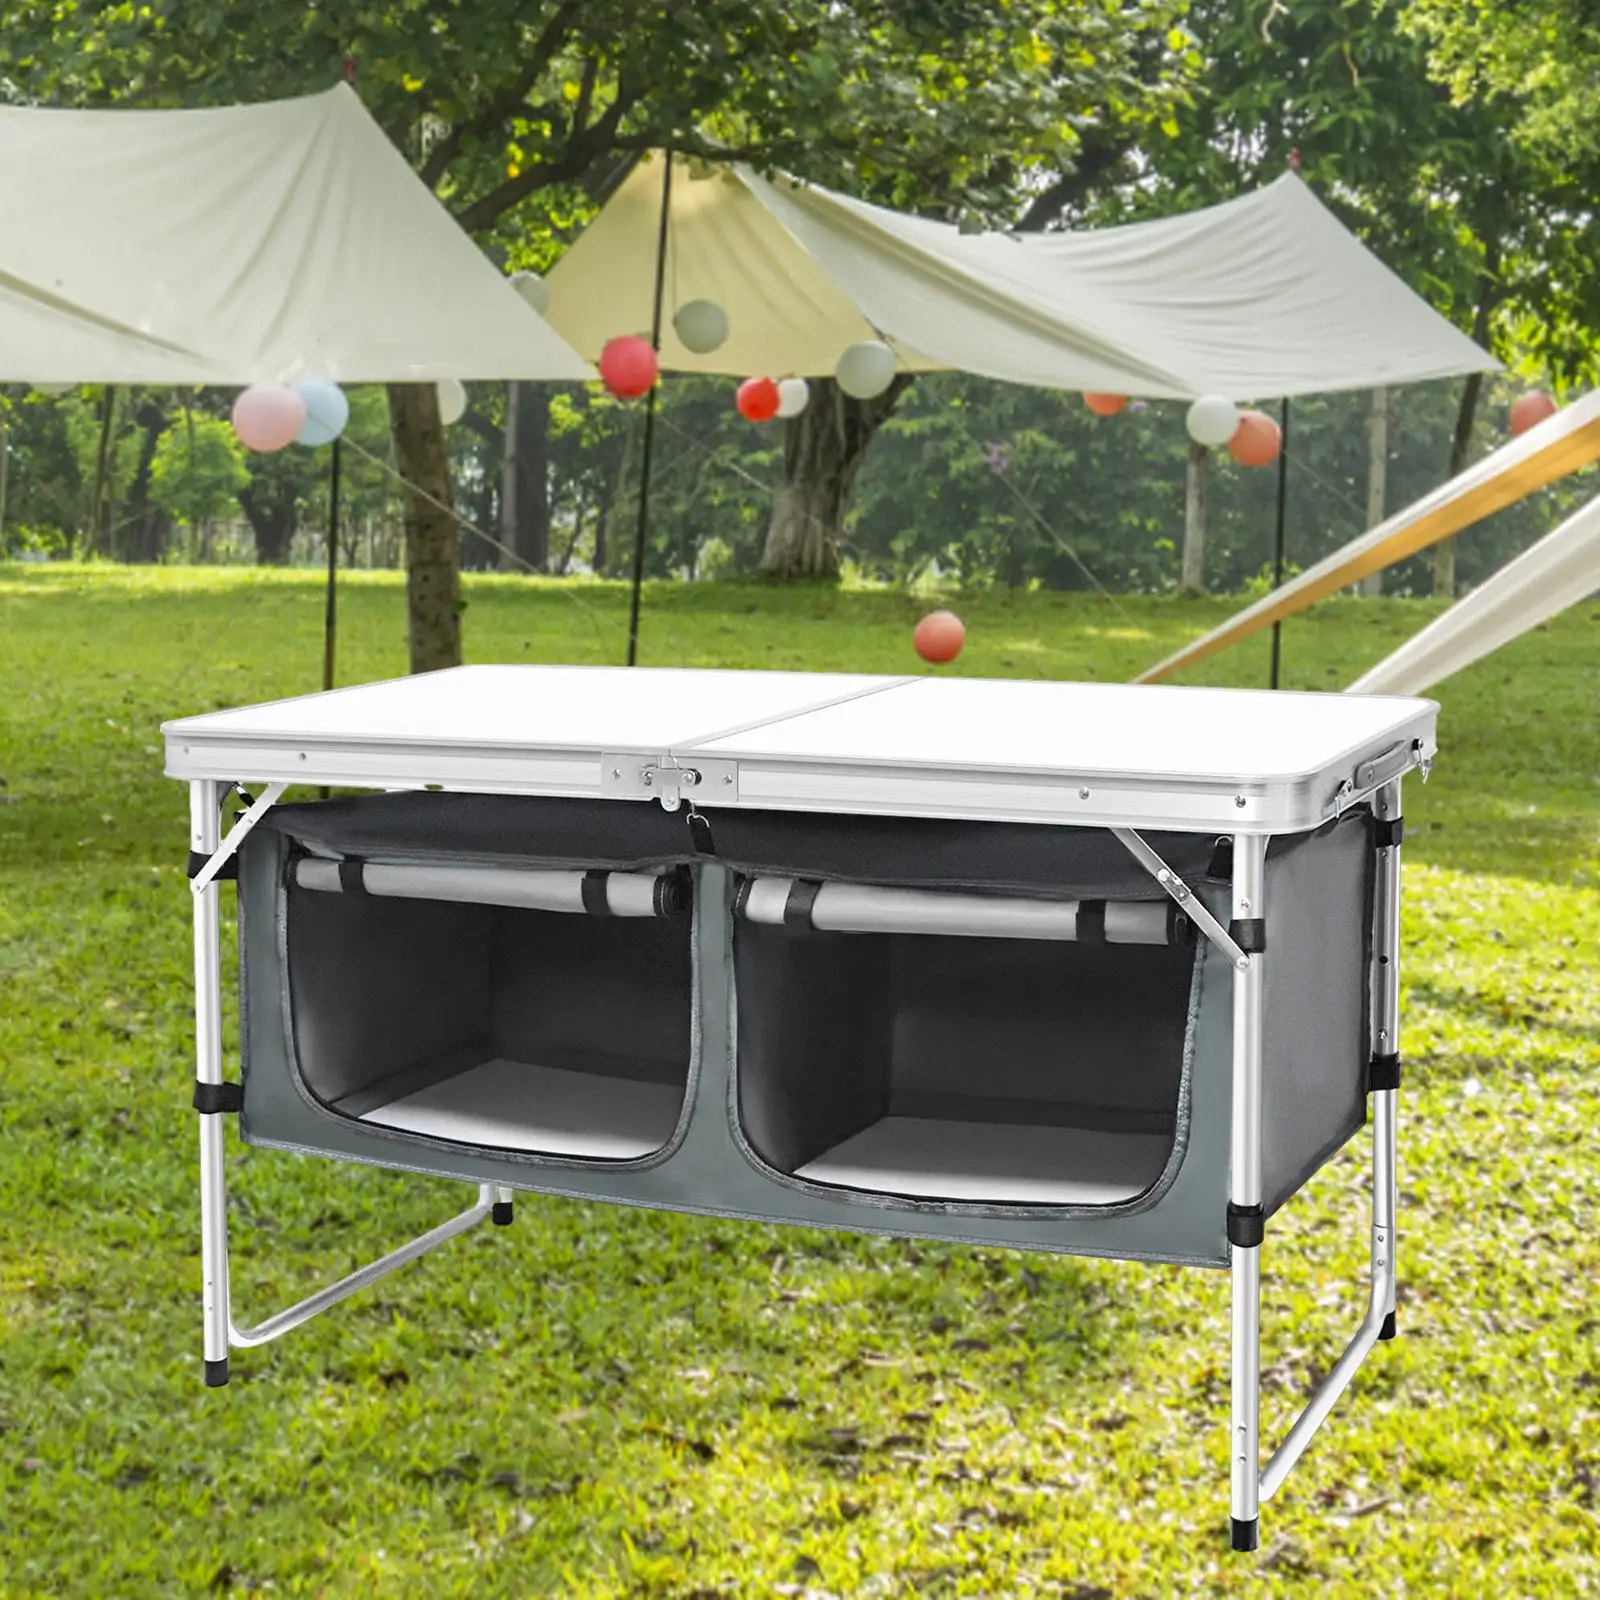 Folding Camping Picnic Table with Storage Compartment Sturdy Easy Carry with Adjustable Legs Lightweight Folding Outdoor Table